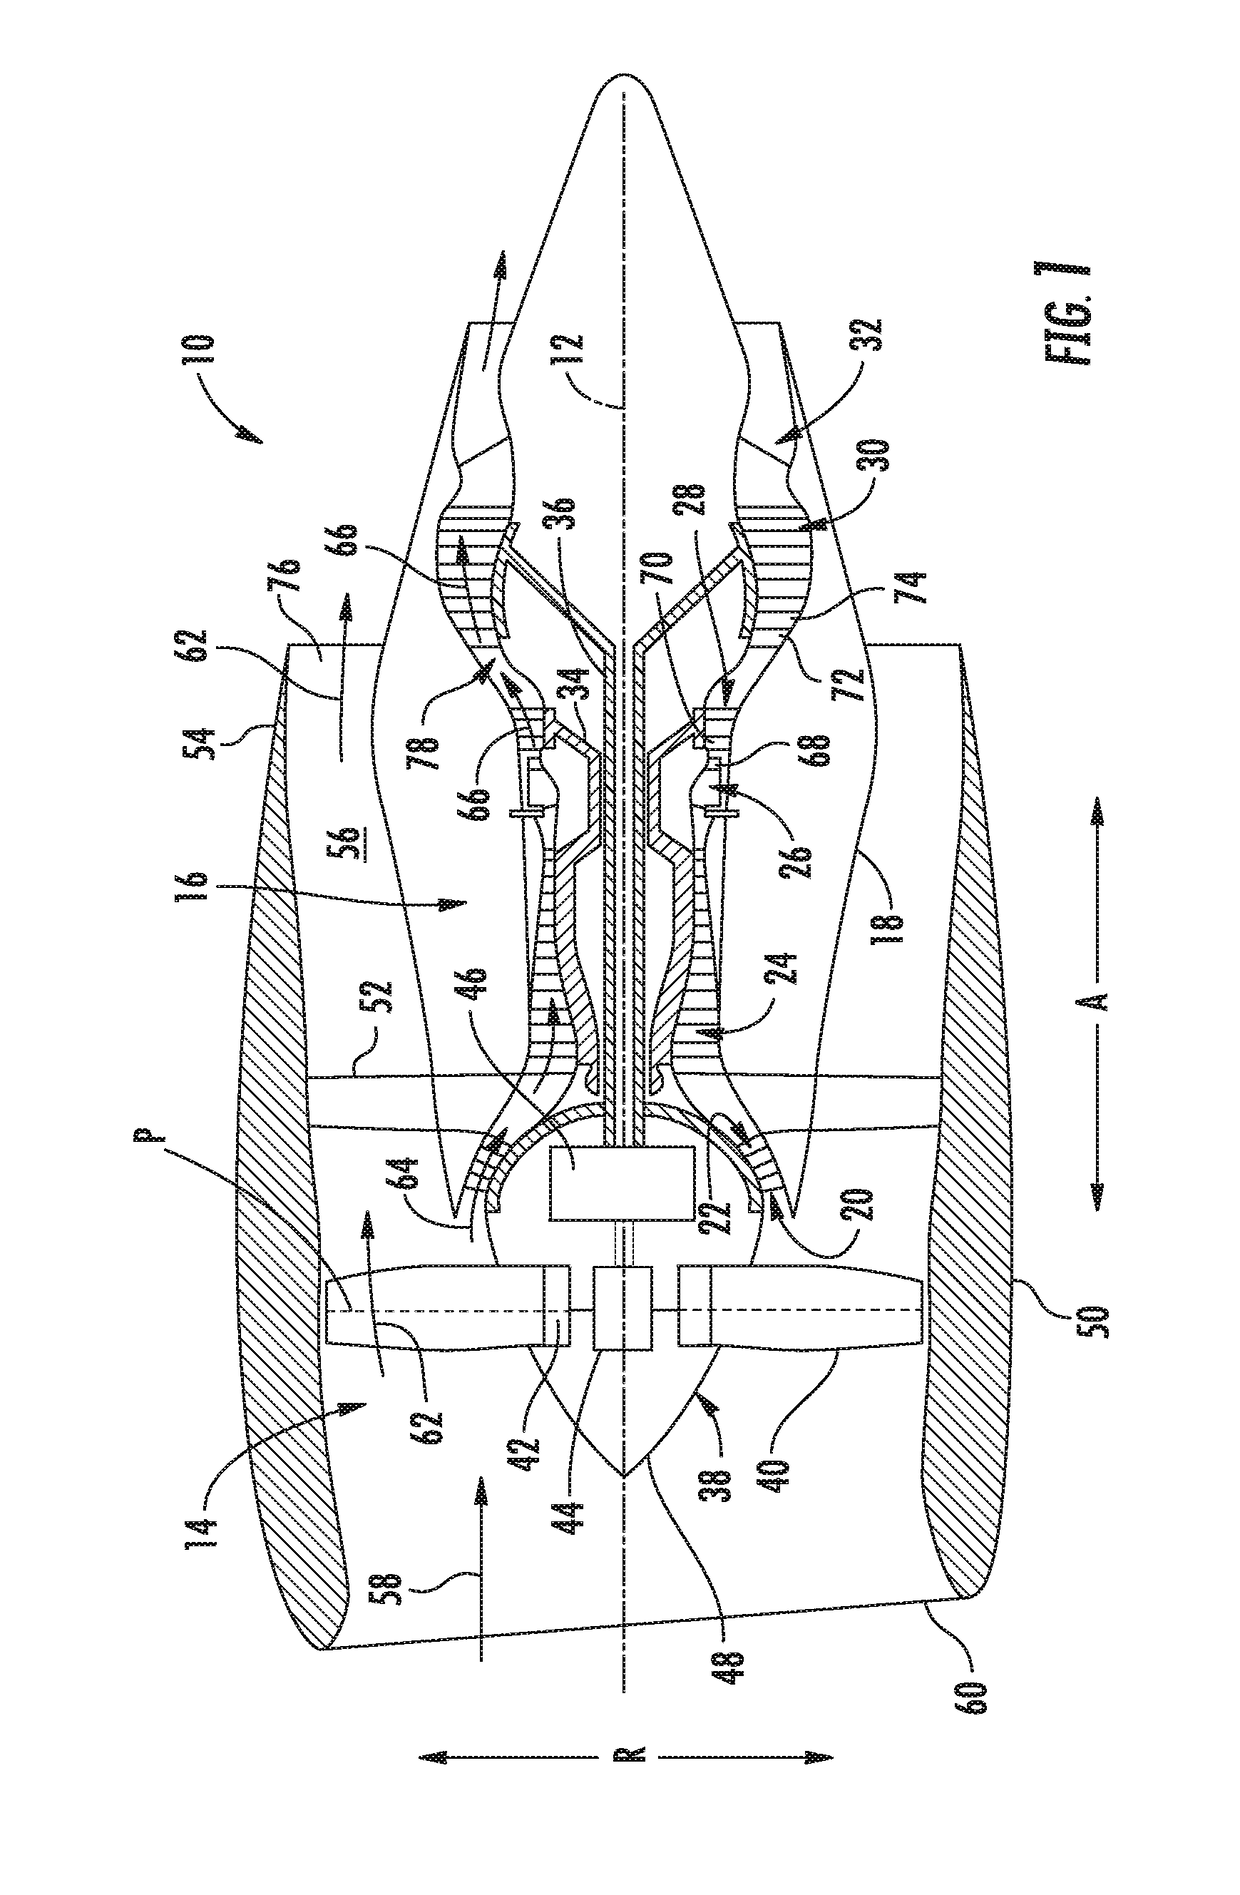 Bleed flow extraction system for a gas turbine engine